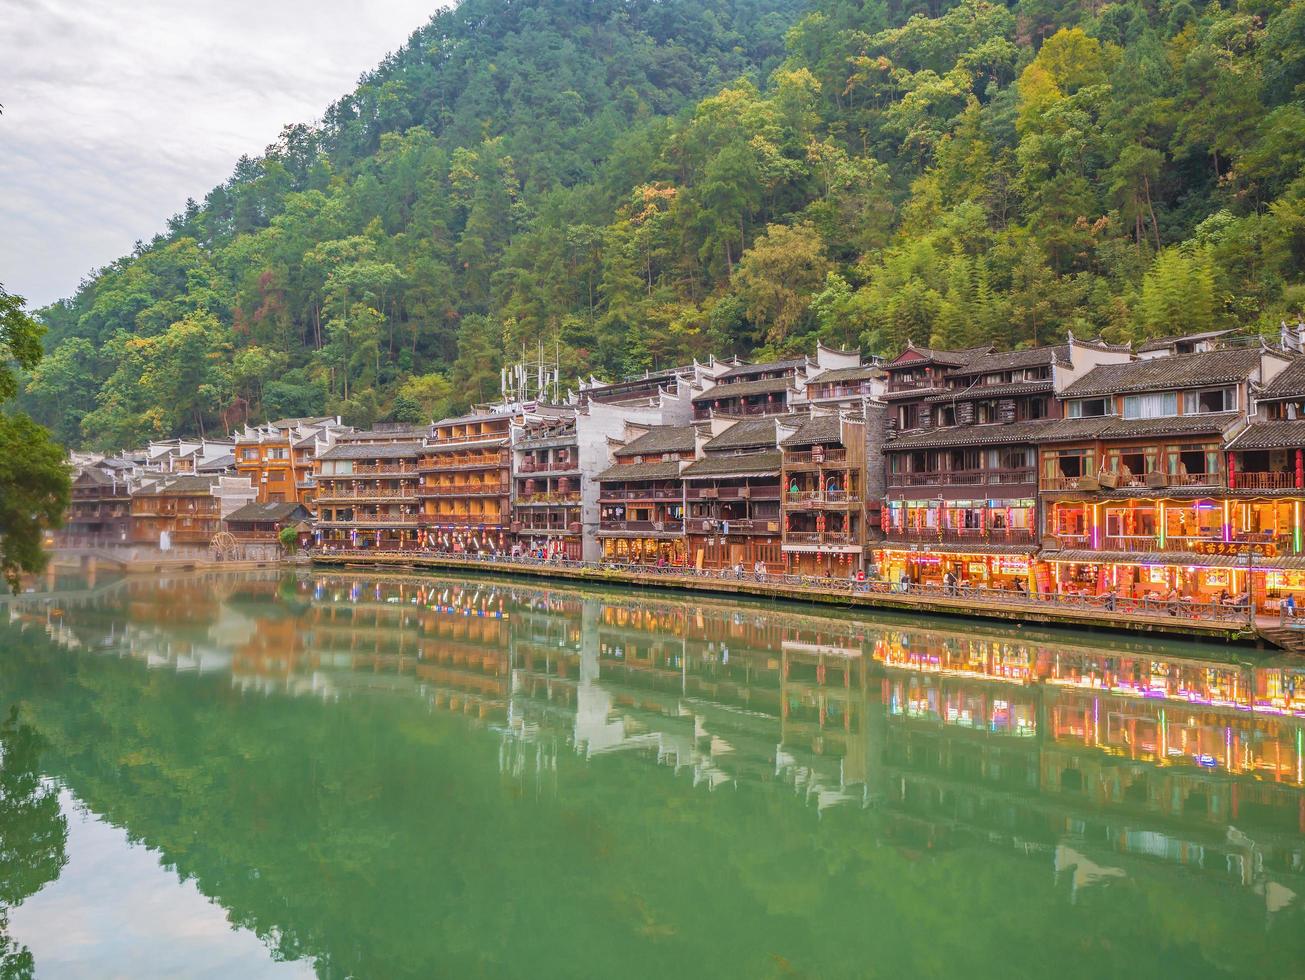 Scenery view of fenghuang old town .phoenix ancient town or Fenghuang County is a county of Hunan Province, China photo